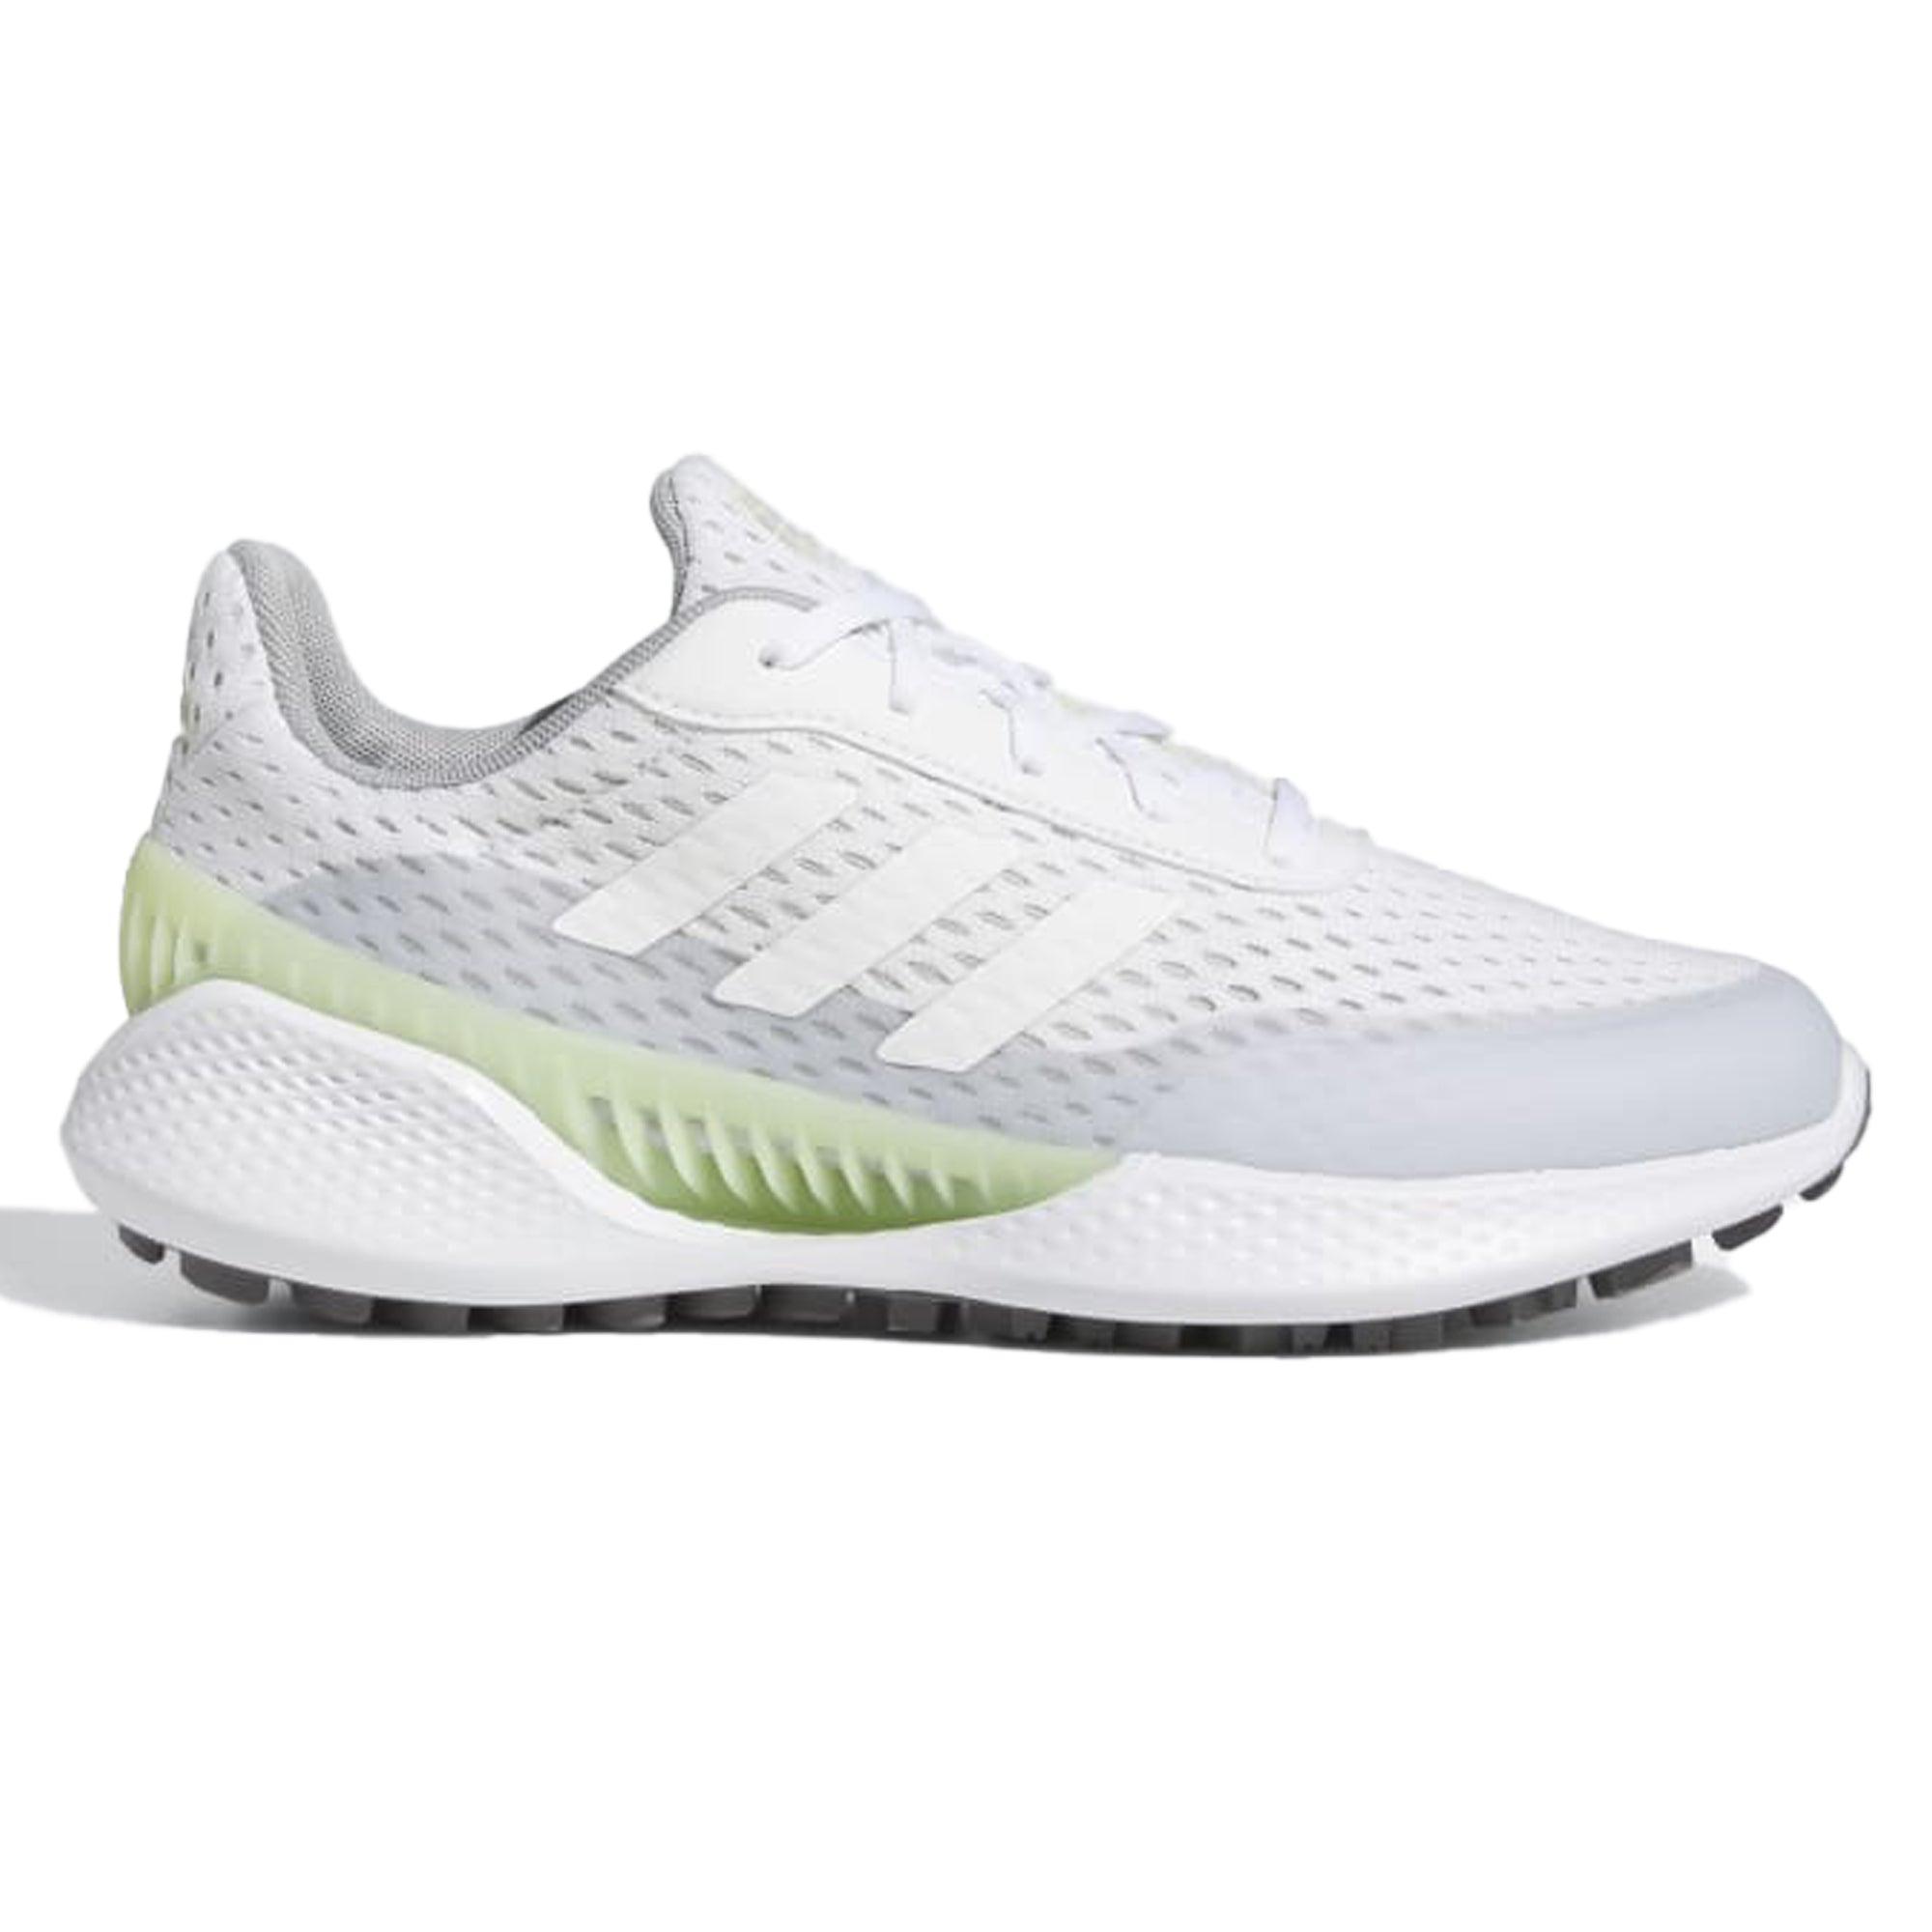 Adidas Women's Summervent Recycled Polyester Spikeless Golf Shoes